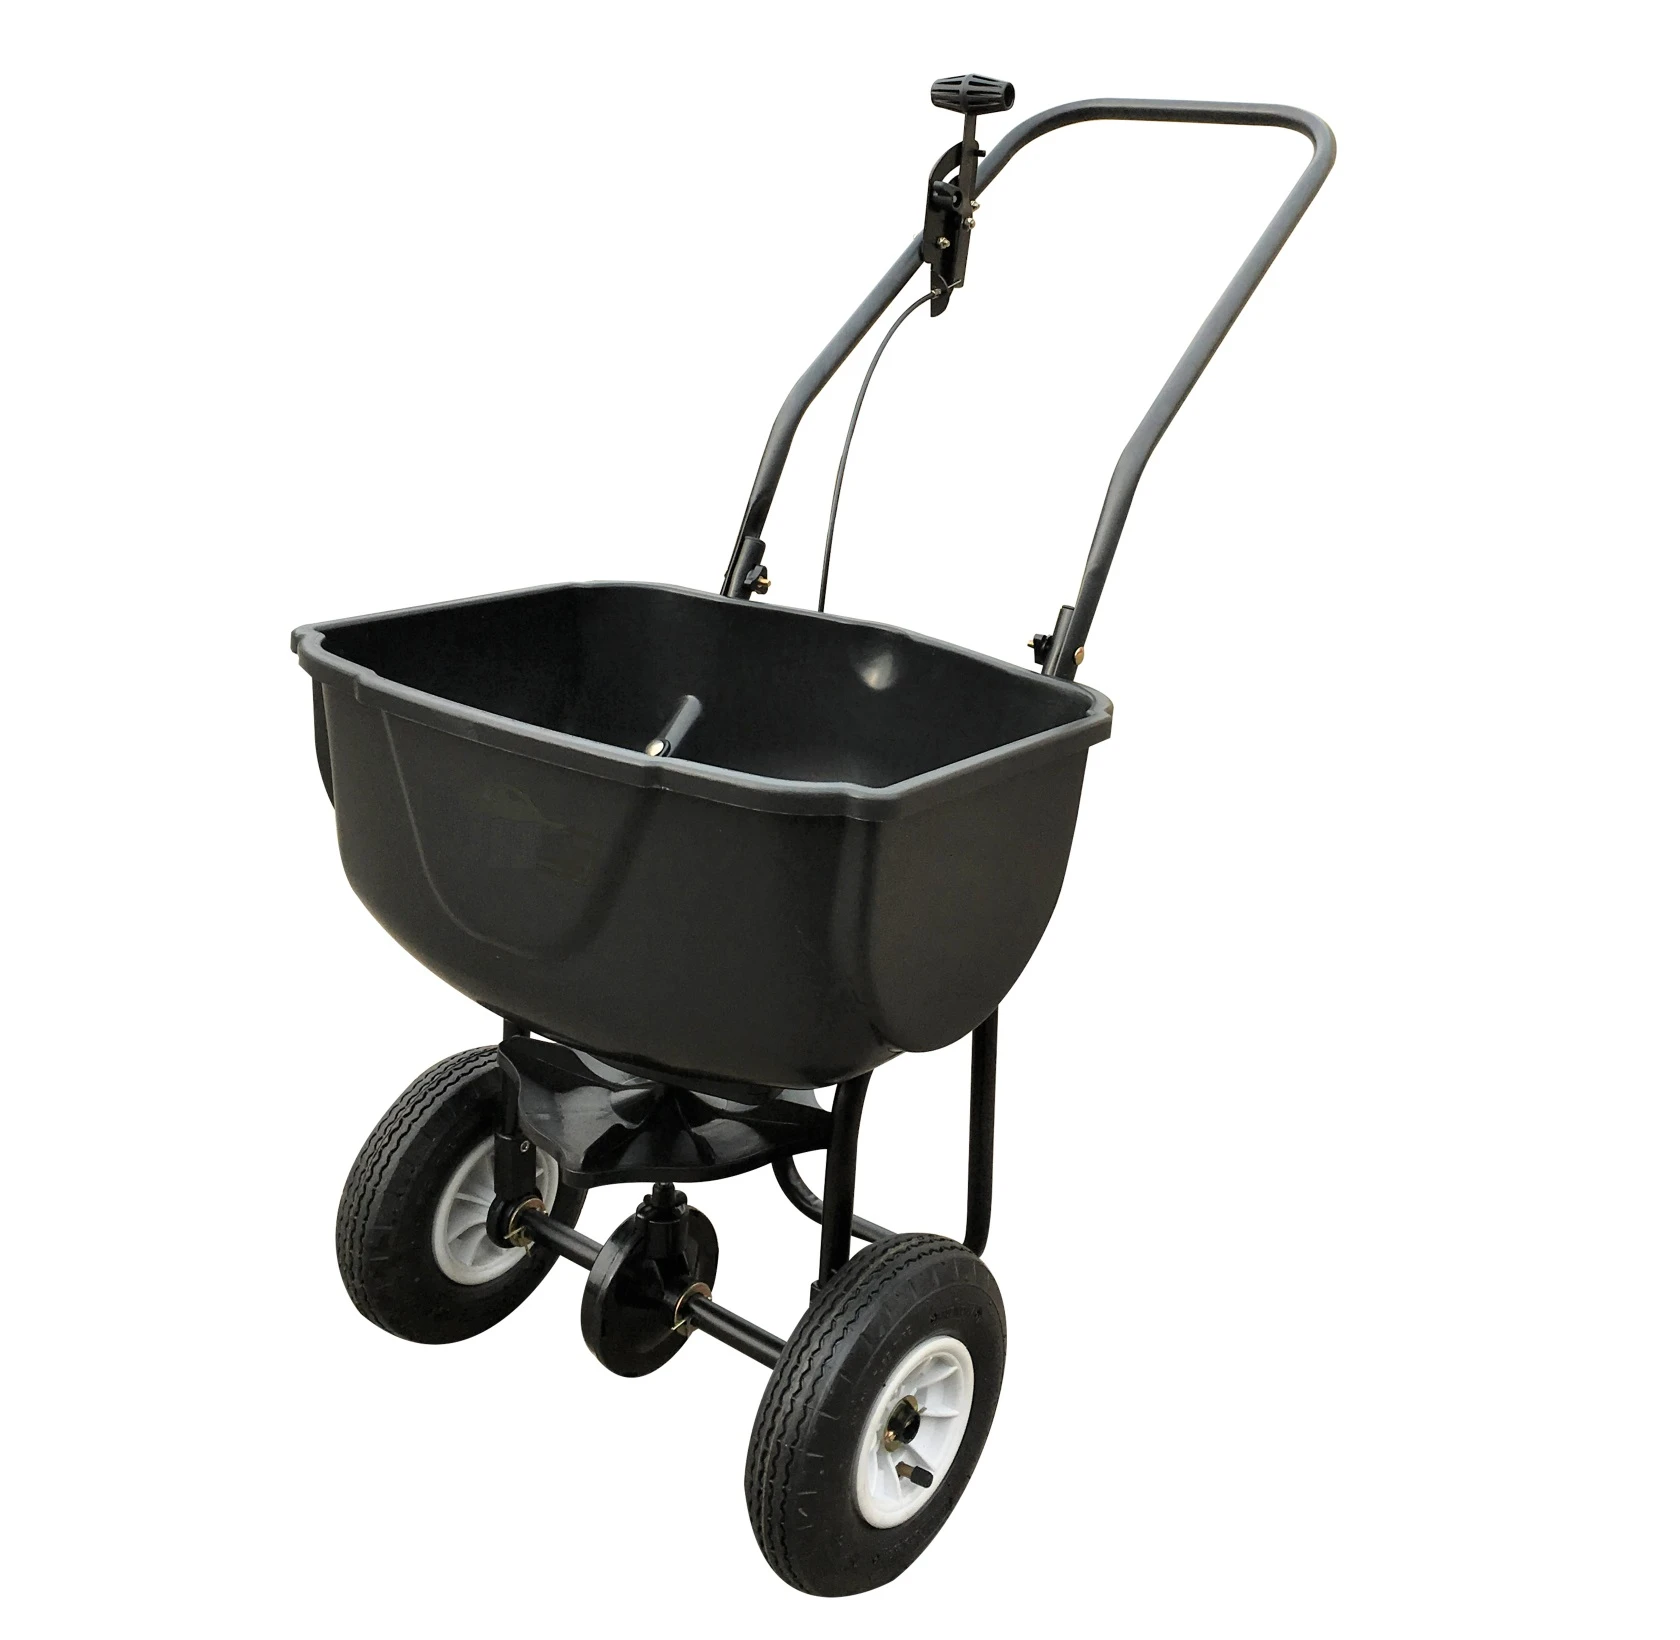 Hot Selling Multiple Sizes Powder Coating Durable and Practical Garden Cart